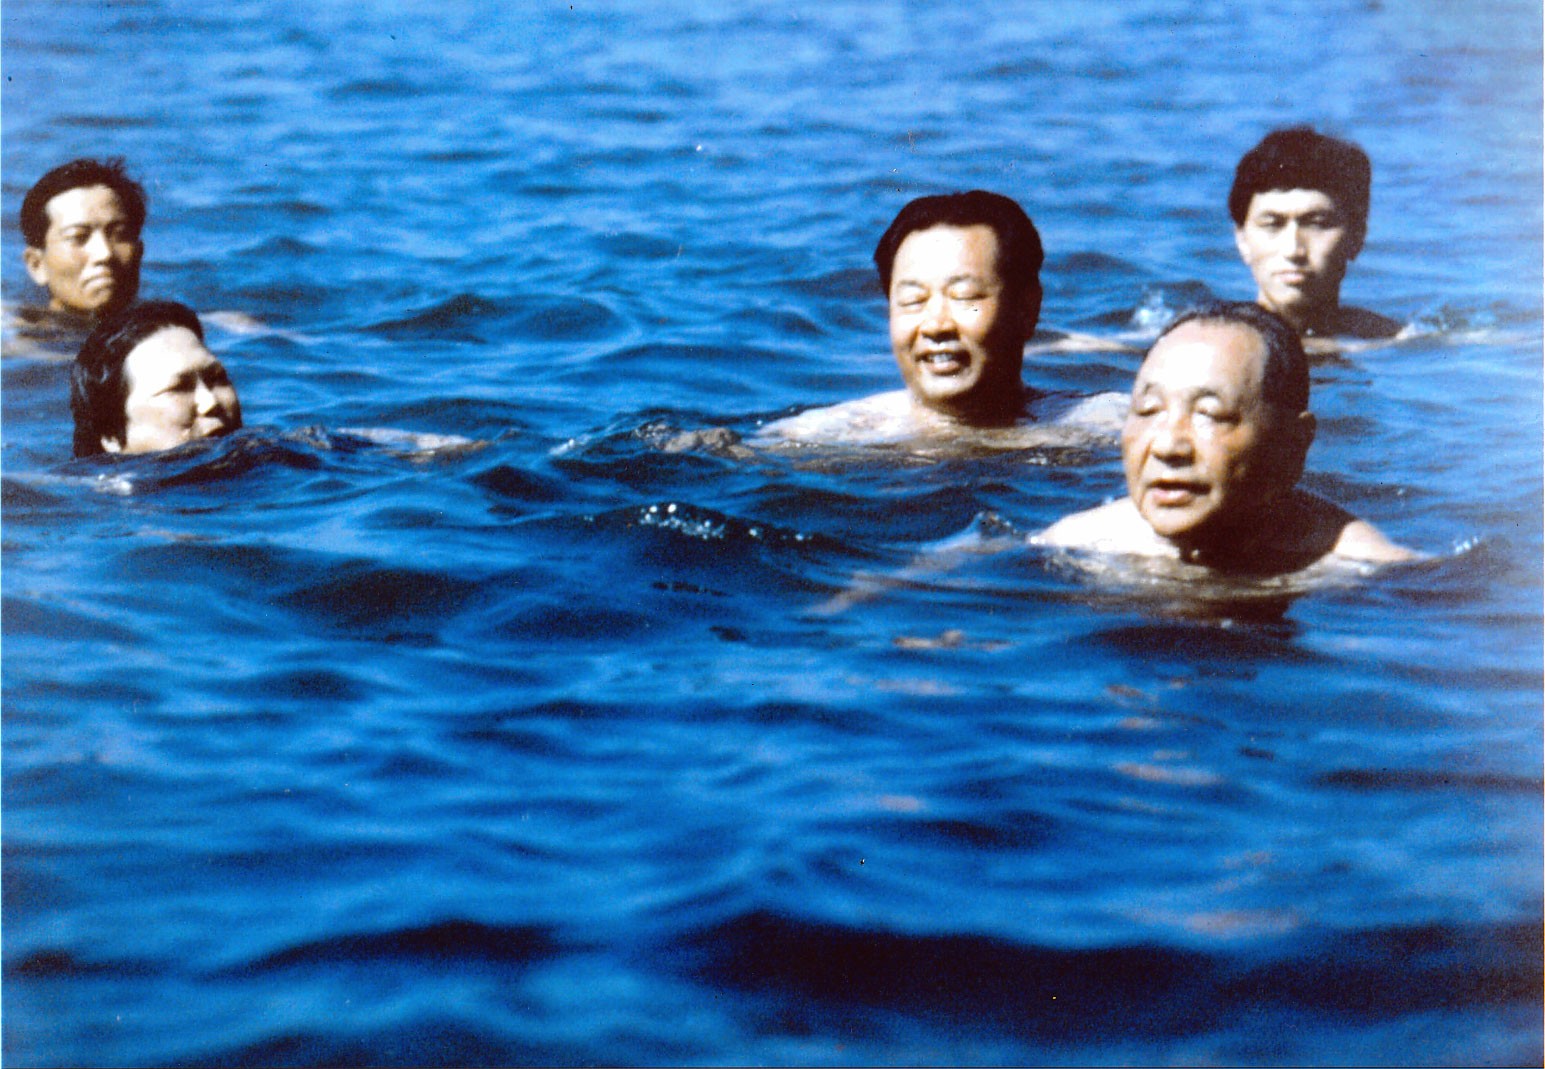 Deng Xiaoping (right foreground) in the sea at Beidaihe in July 1987. Photo: Xinhua